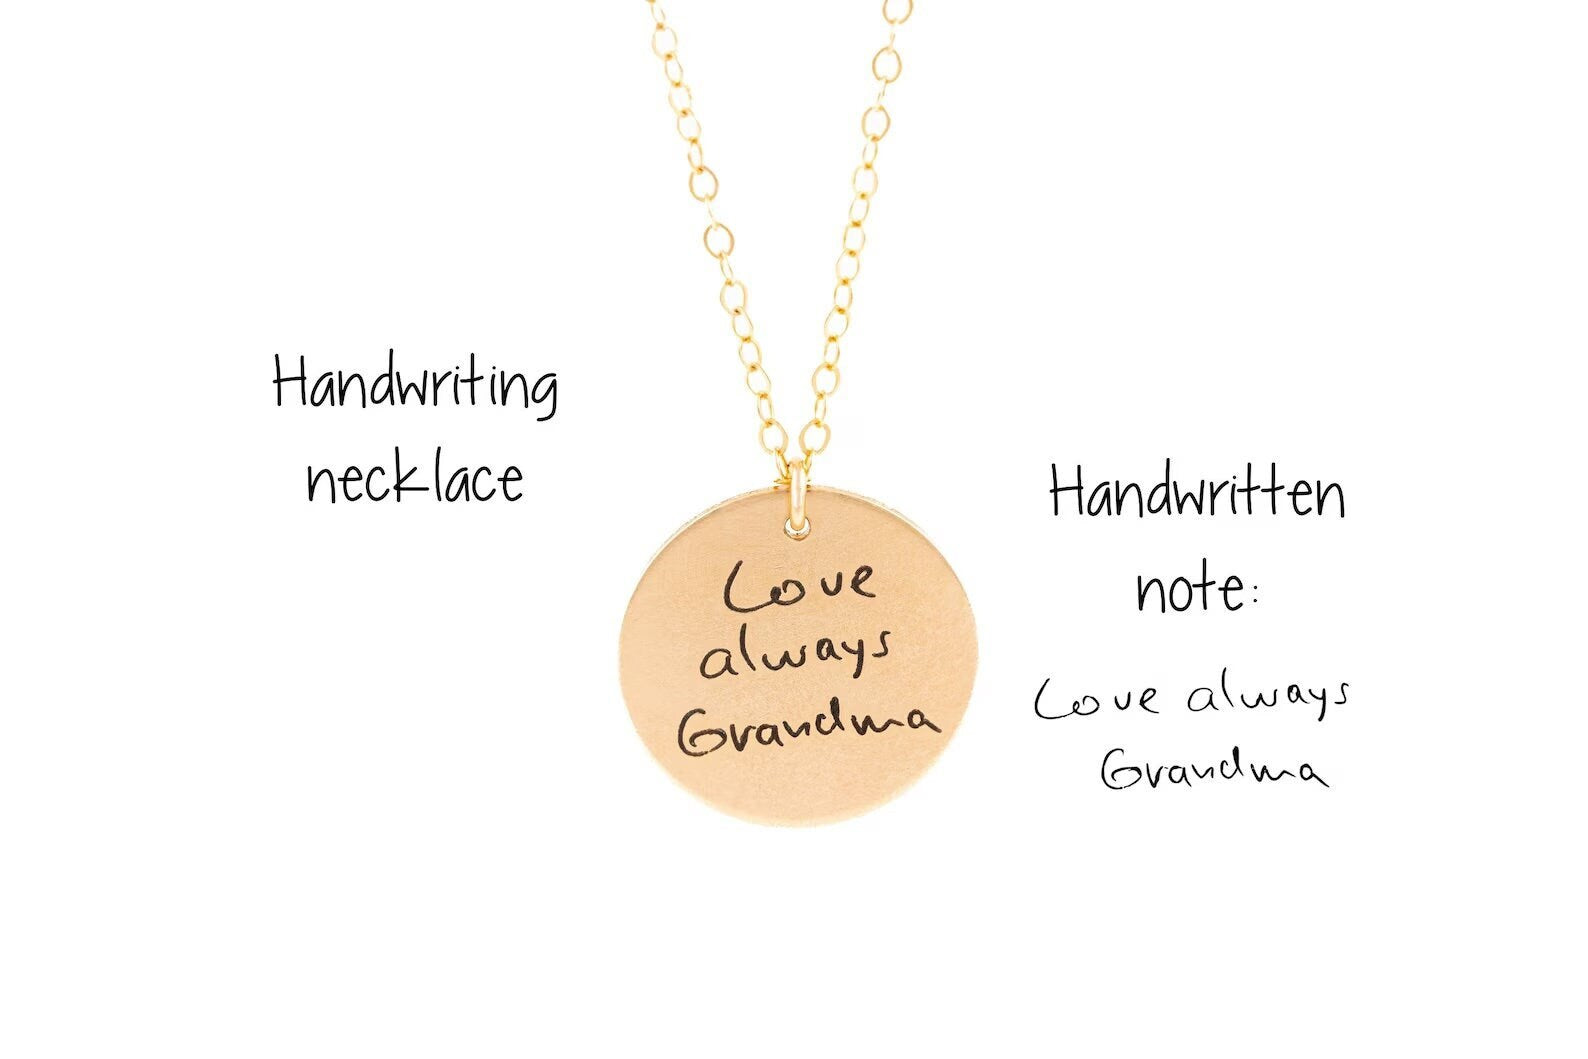 Handwriting Necklace,  Personalized Necklace, Handwriting Jewelry,  handwriting memorial necklace, handwriting gift, Signature